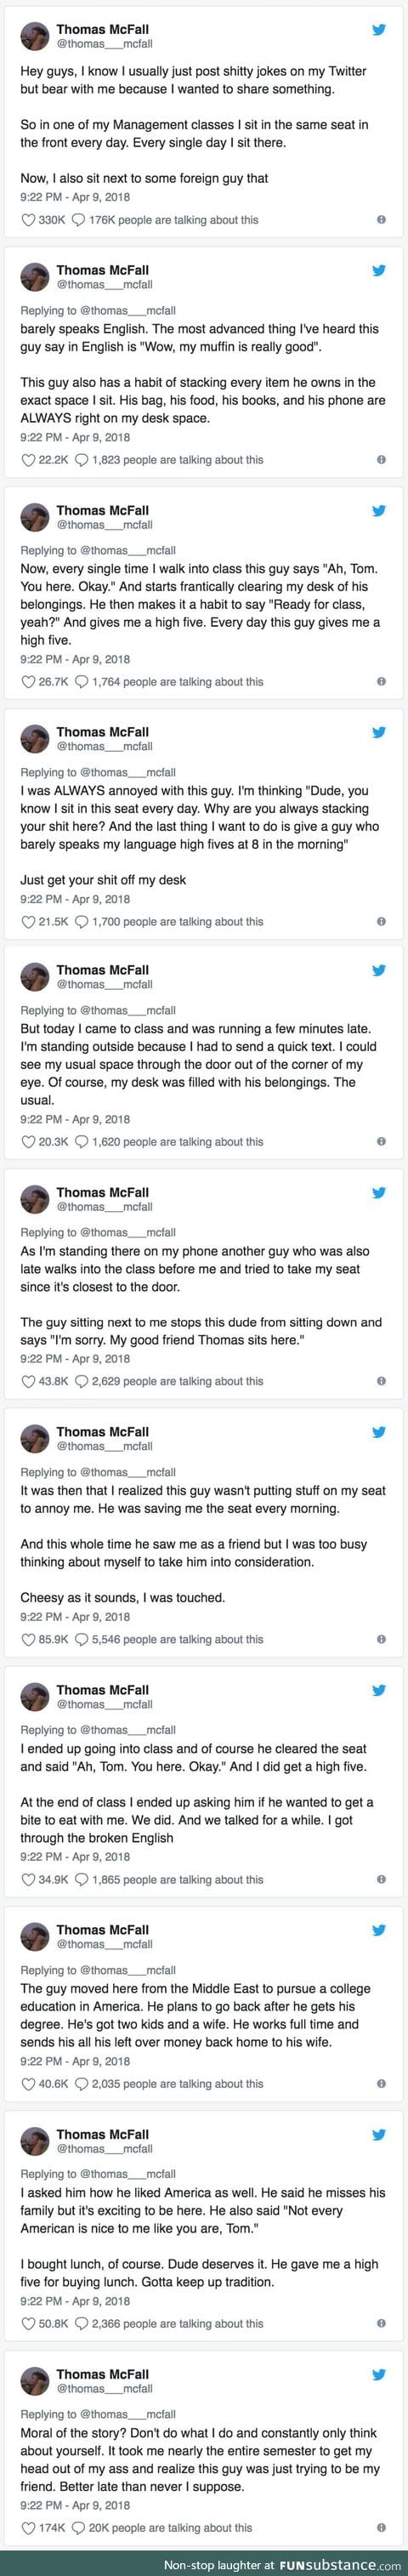 He called out his own ignorance for misjudging a foreign classmate